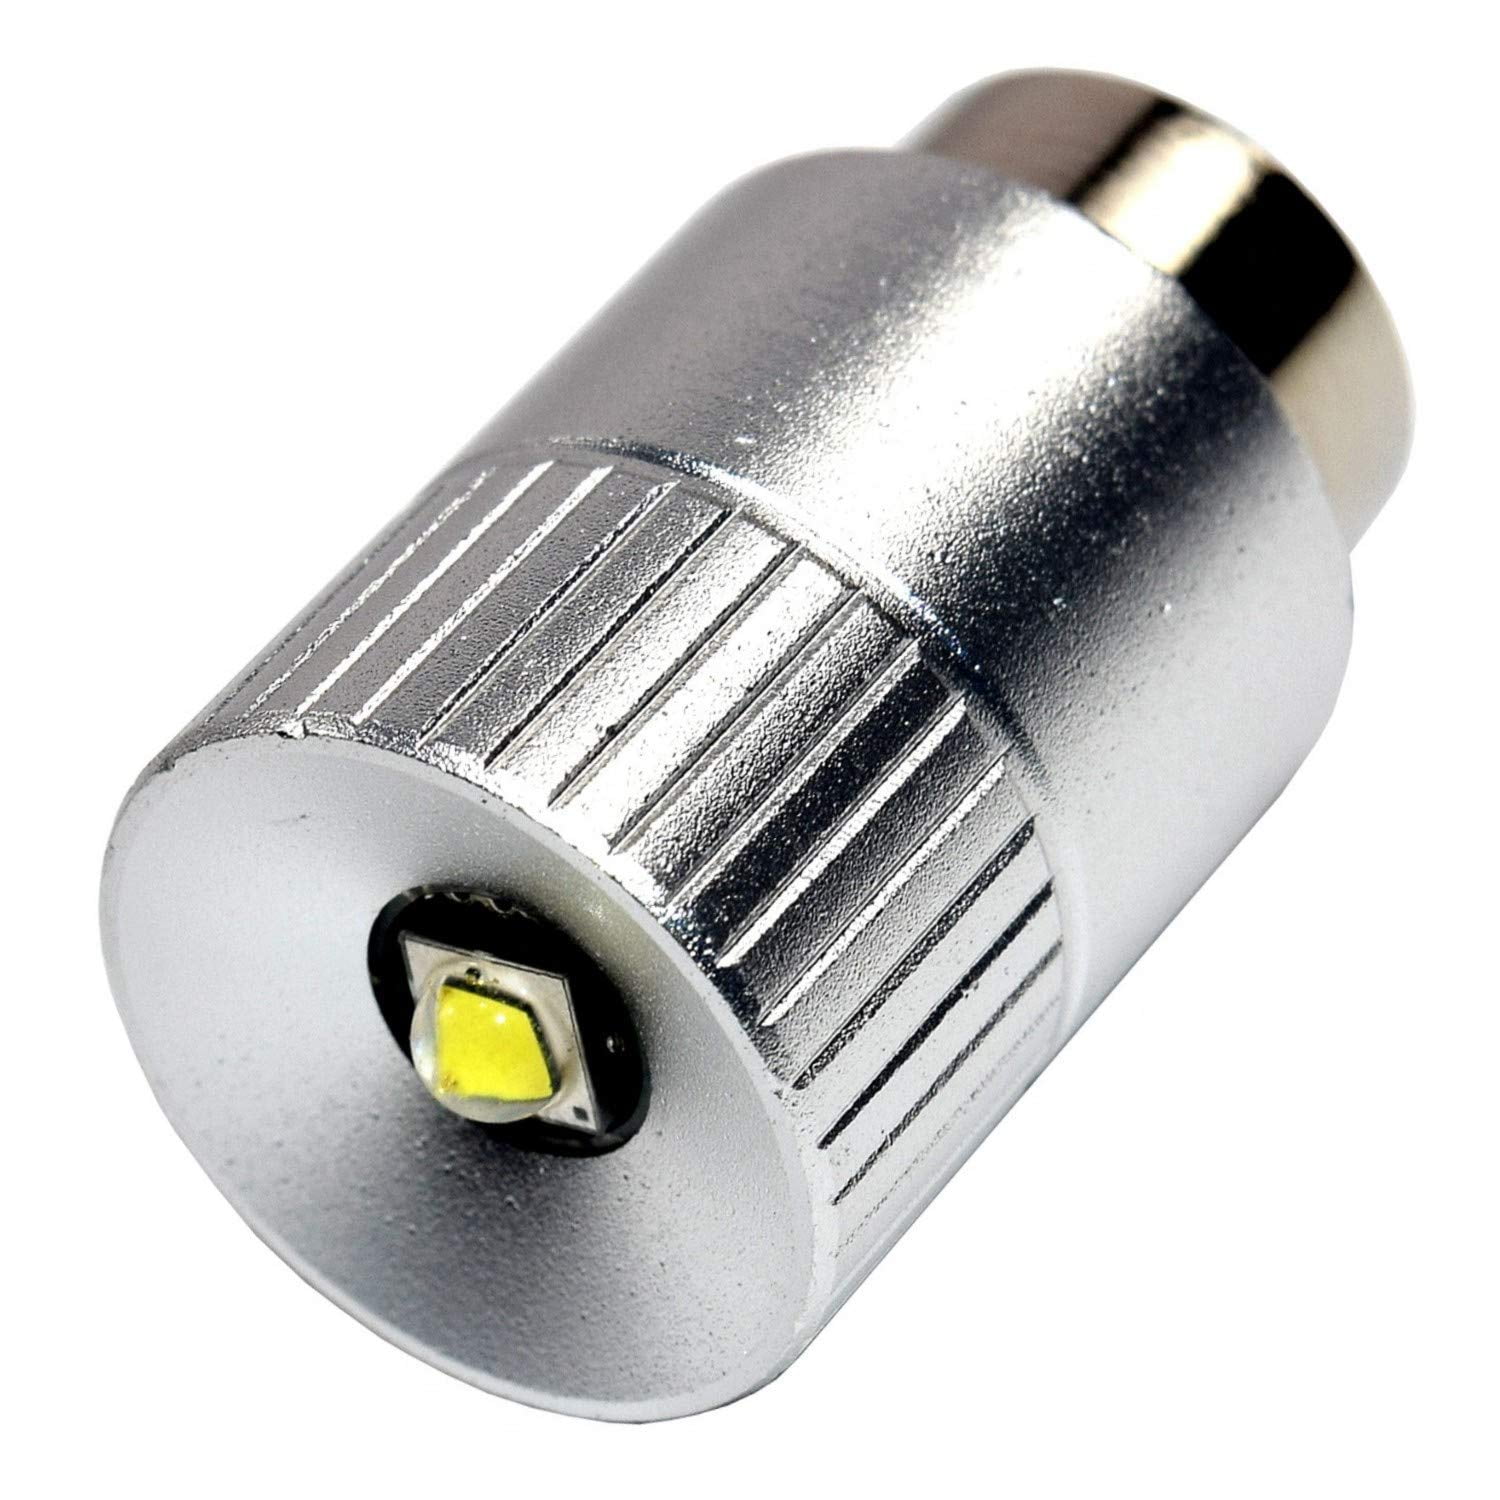 Power 3w Led Conversion Upgrade Bulb, What Is The Brightest Led Flashlight Bulb